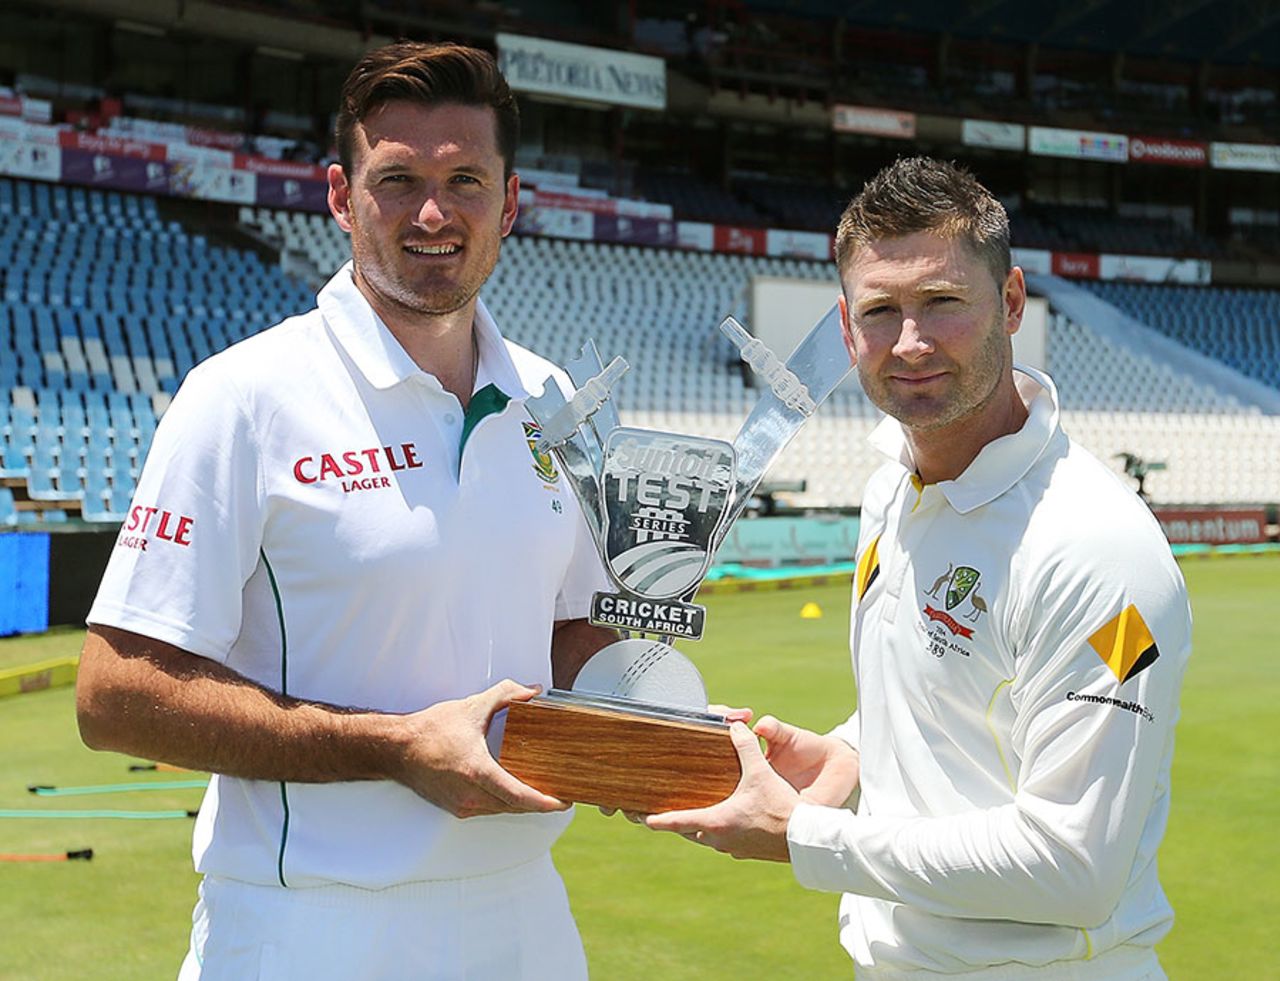 Graeme Smith and Michael Clarke pose with the trophy ahead of the first Test, Centurion, February 11, 2014 